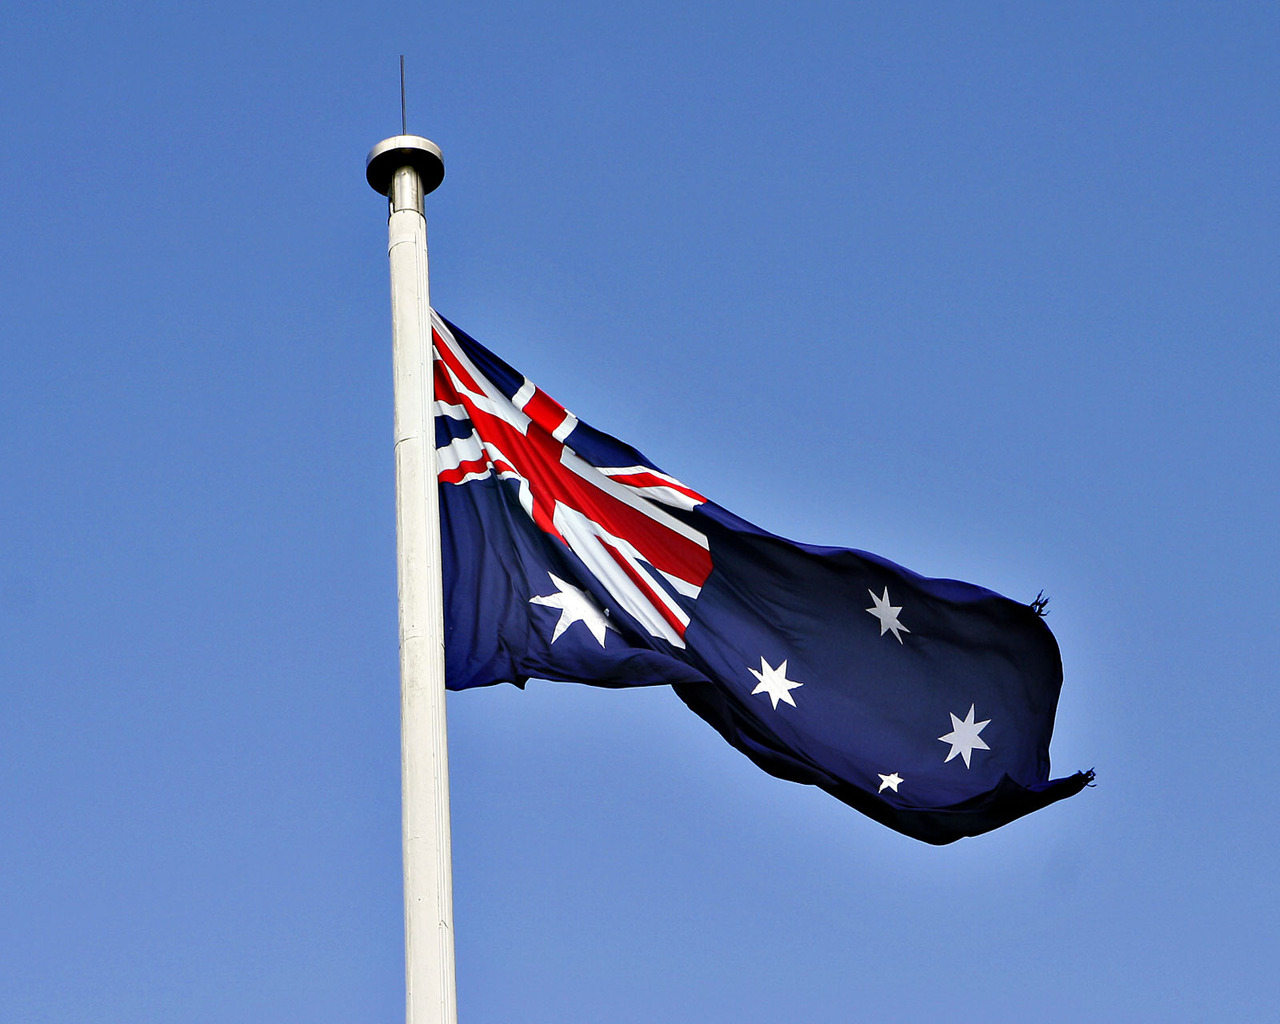 HD Wallpapers Fine: australian flag hd images free download